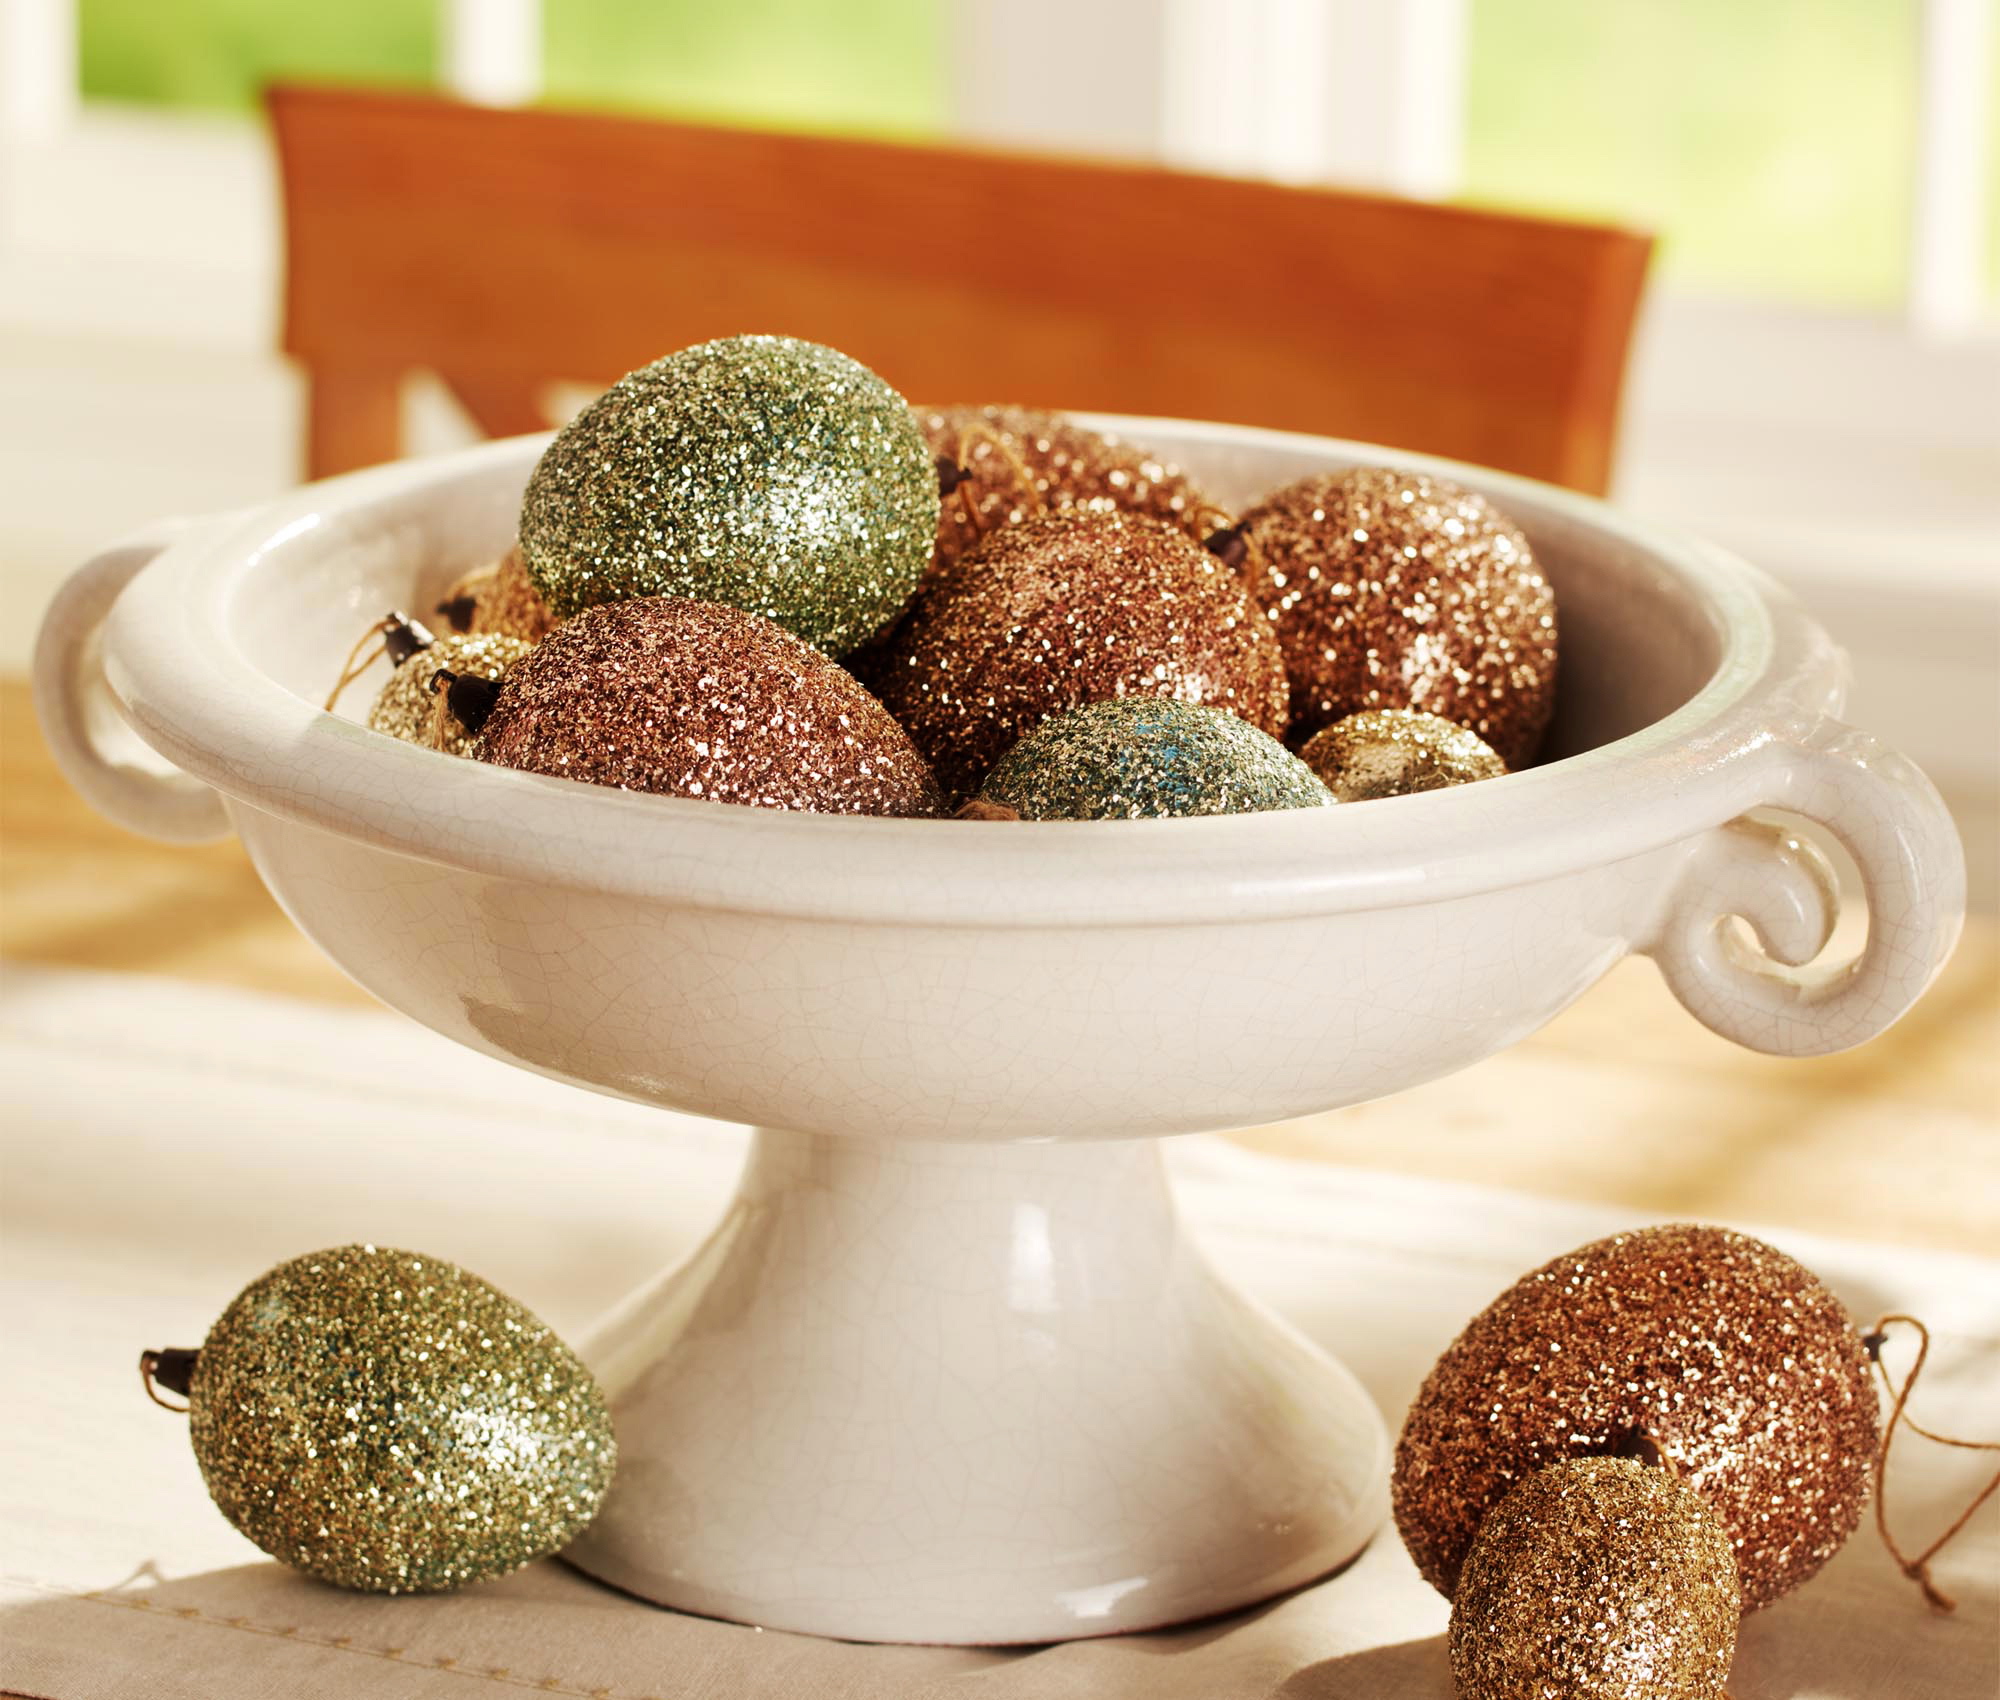 Pottery Barn's glitter-covered eggs bring some sophisticated glamour to the Easter table.